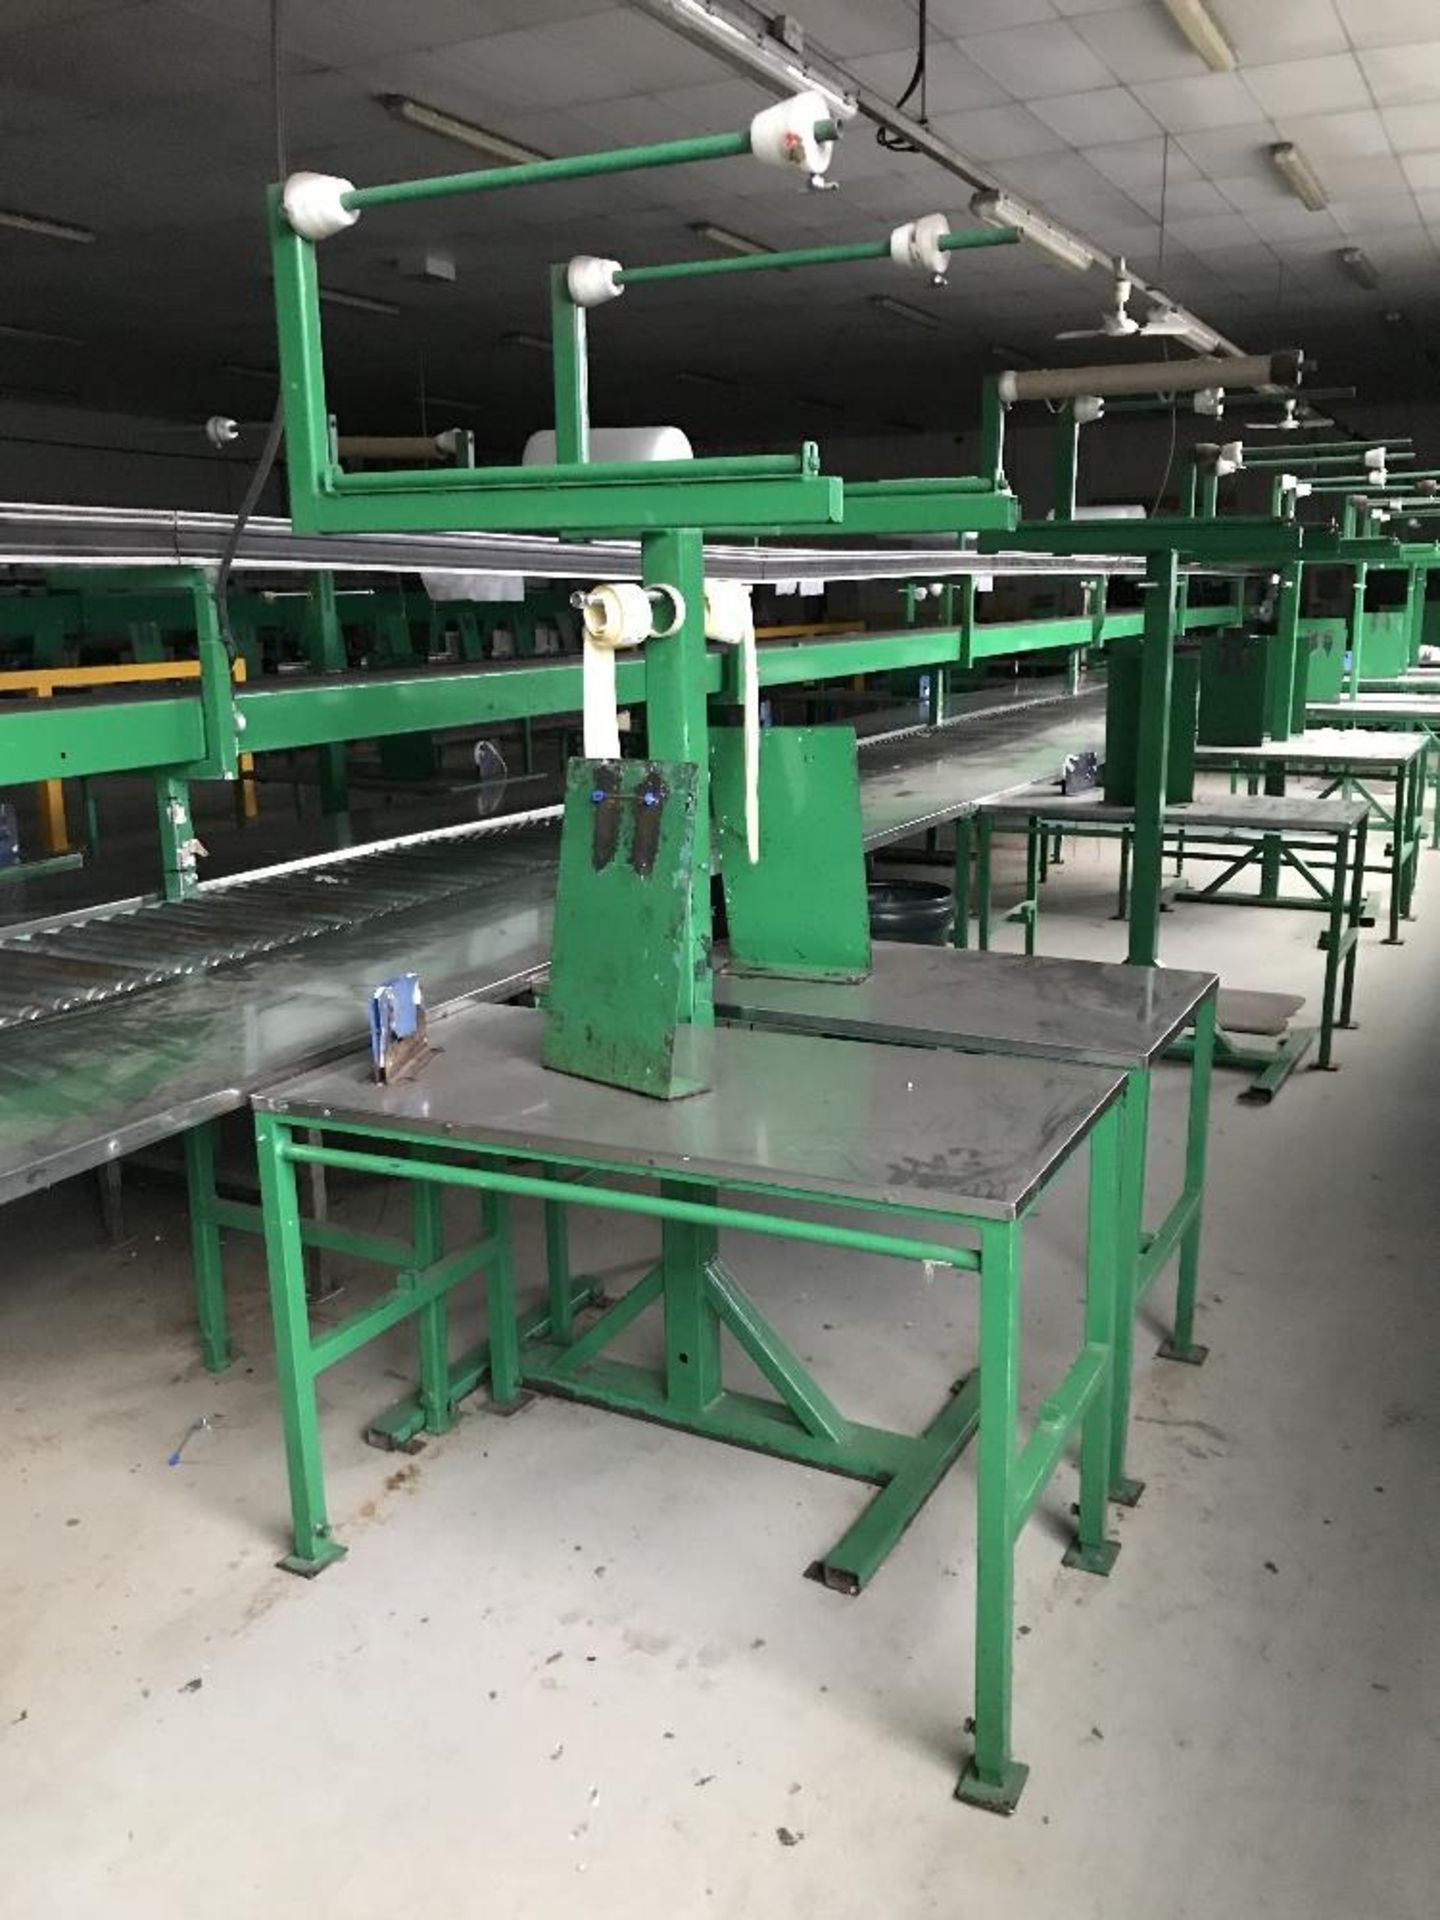 Manual Packing Line - Image 12 of 17